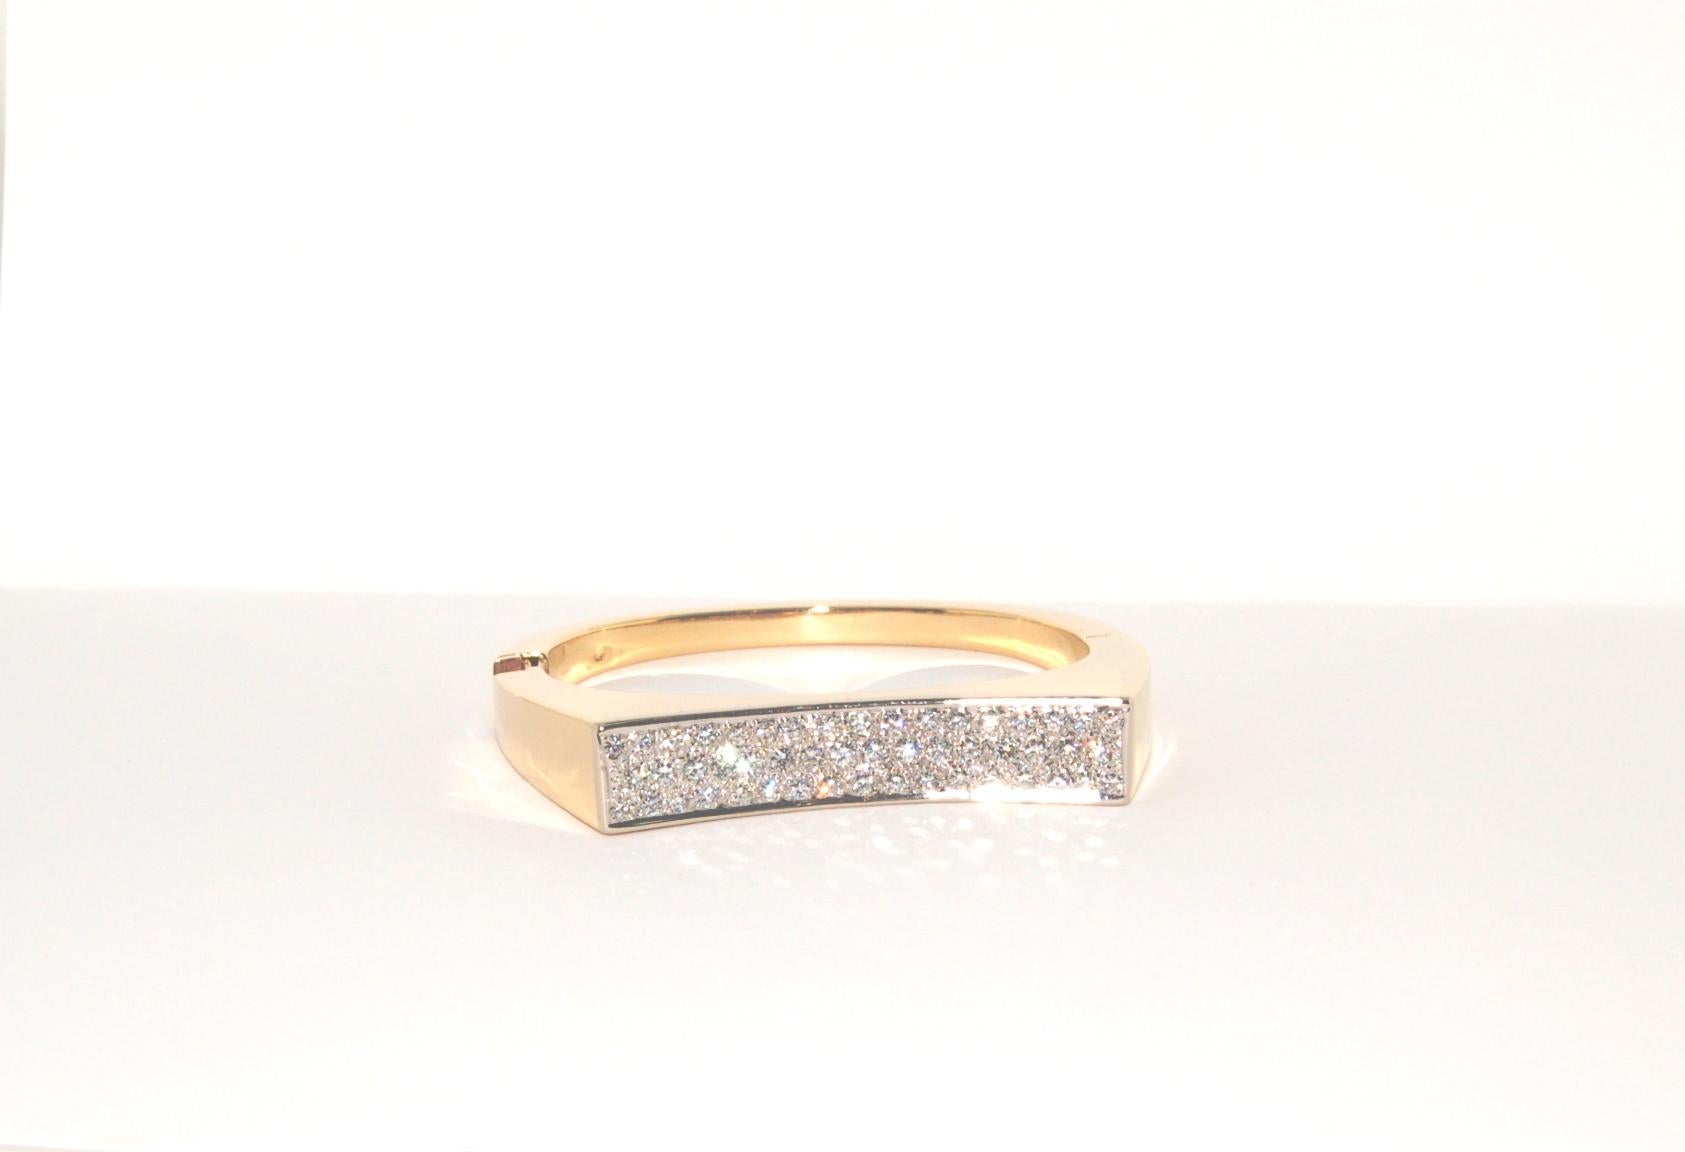 Diamond Cuff Bracelet in 14 Karat Yellow Gold, Made in Italy, Almost 4 Carat For Sale 1